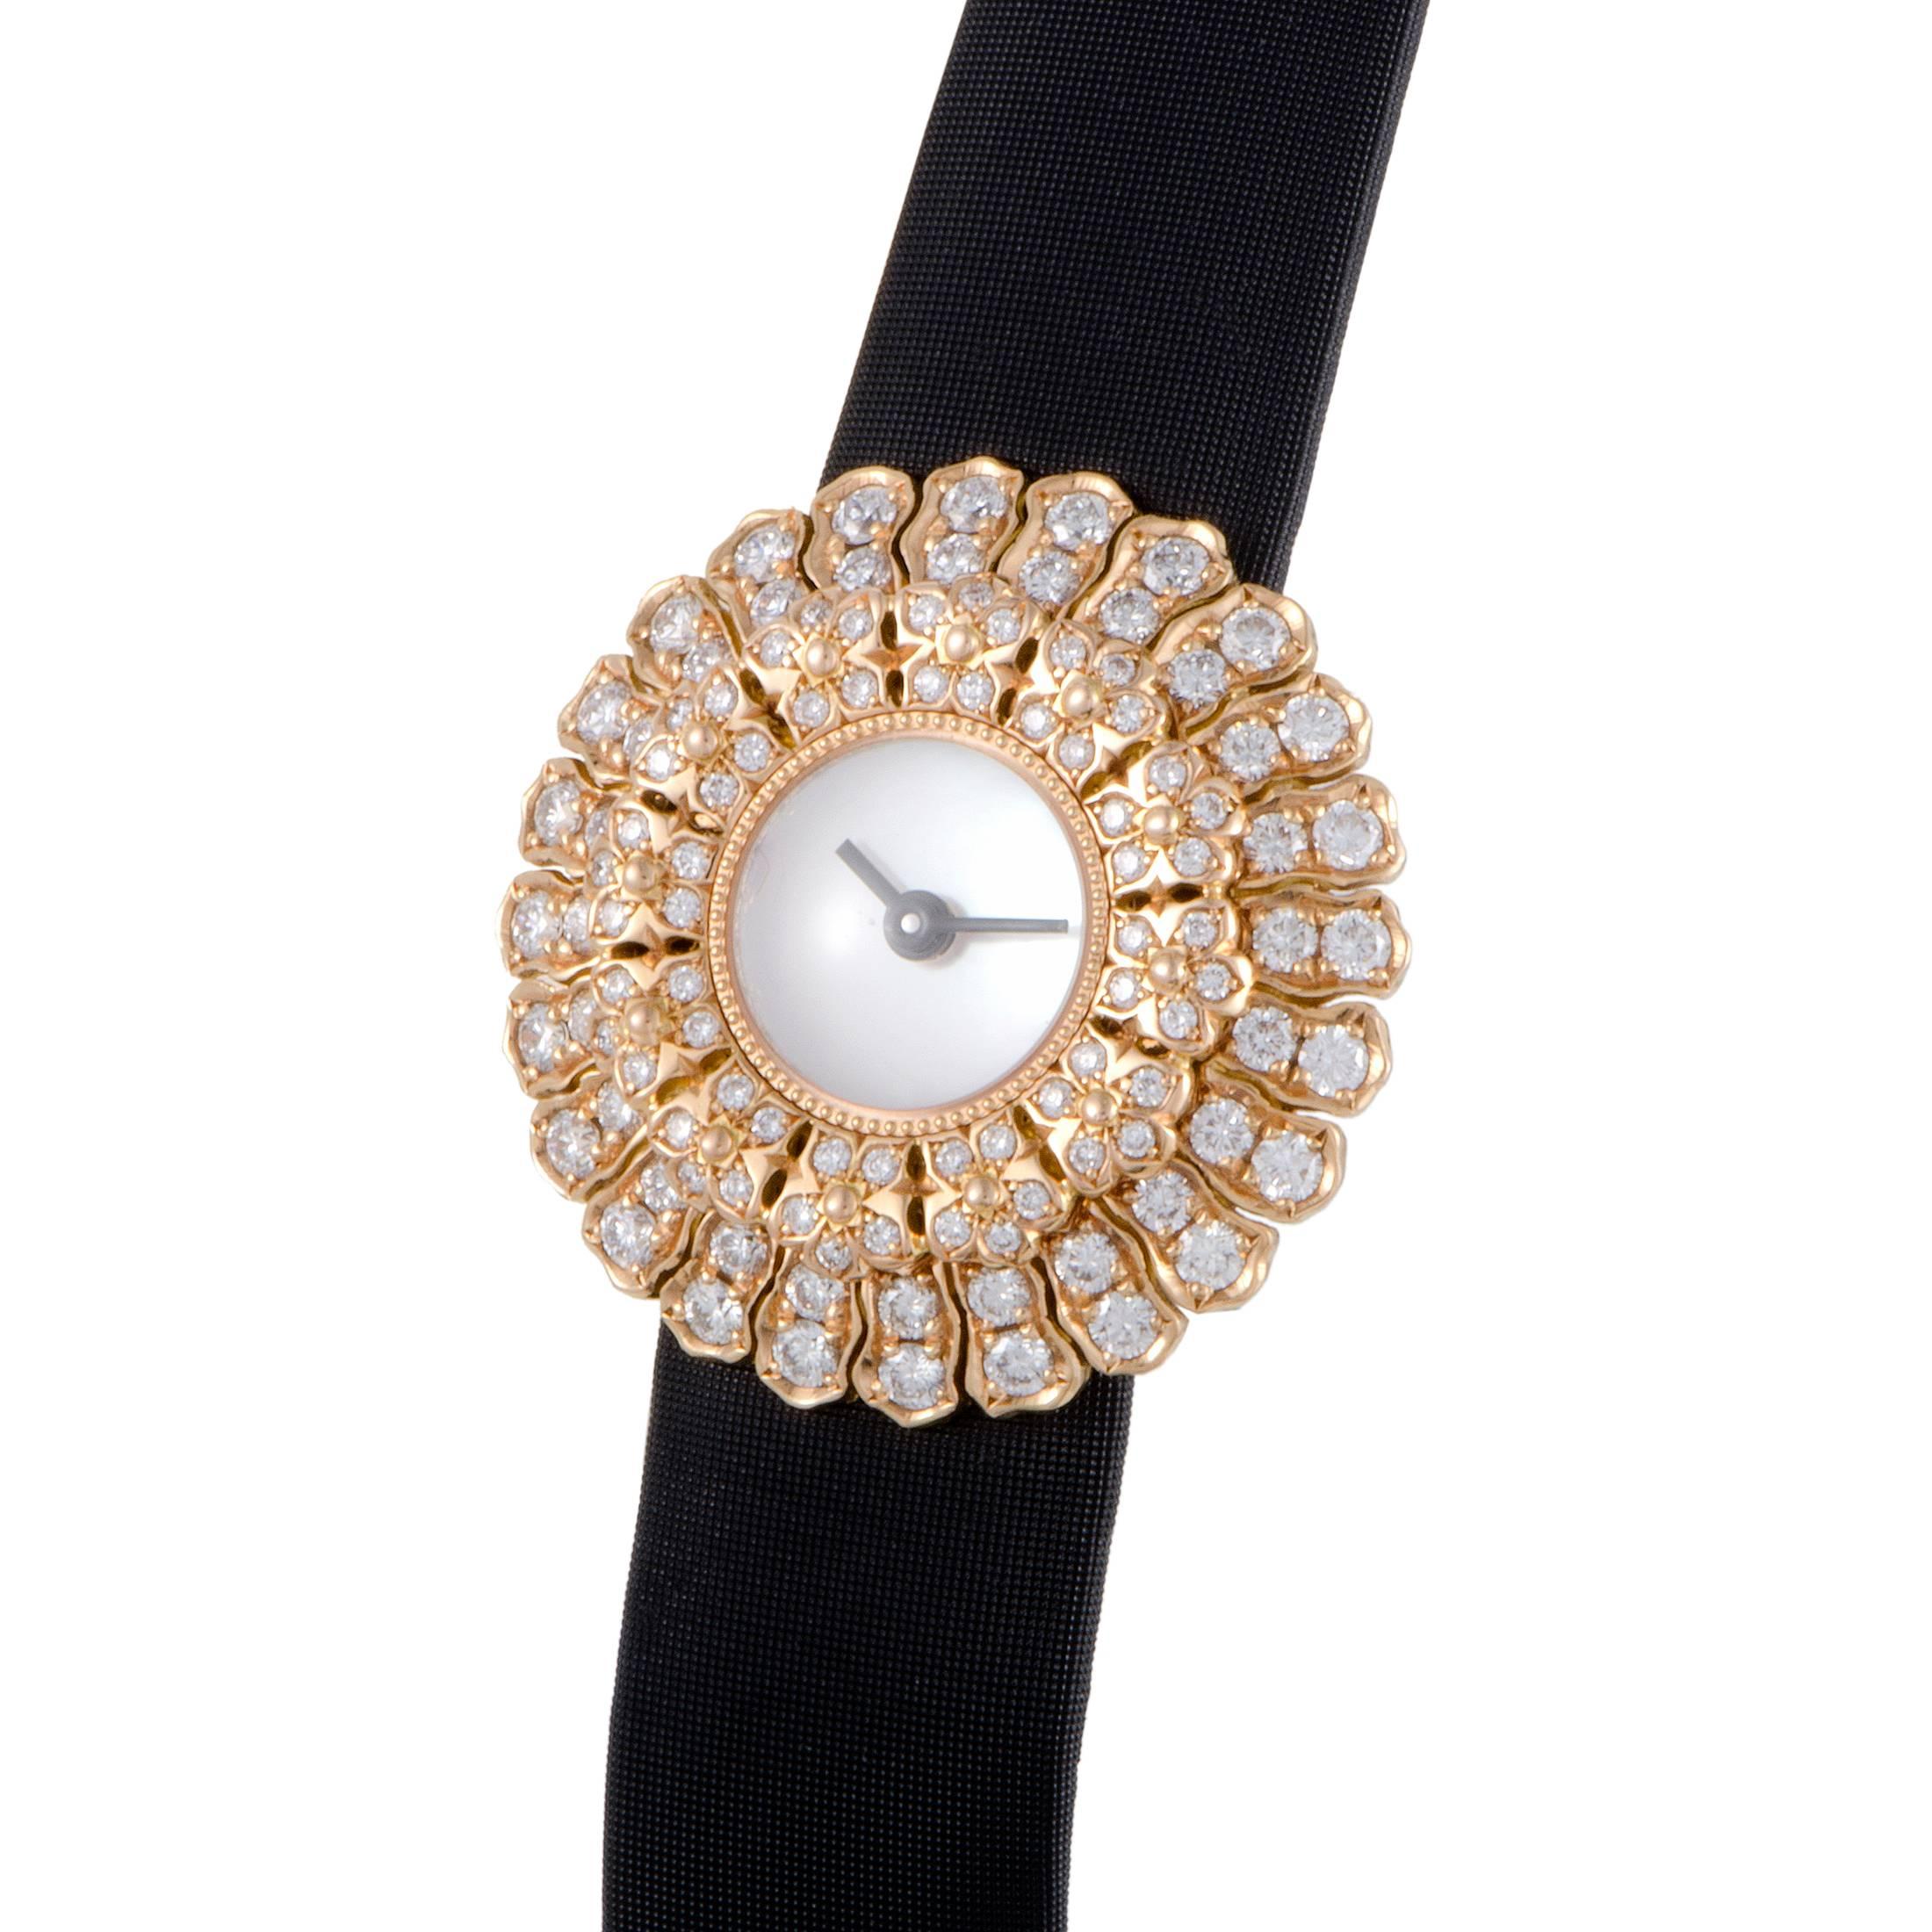 Producing a mesmerizing effect and allowing exceptional emphasis of the splendidly clear dial, the dazzling arrangement of diamonds upon the gloriously designed case offers an irresistible sense of feminine prestige in this exuberant timepiece from